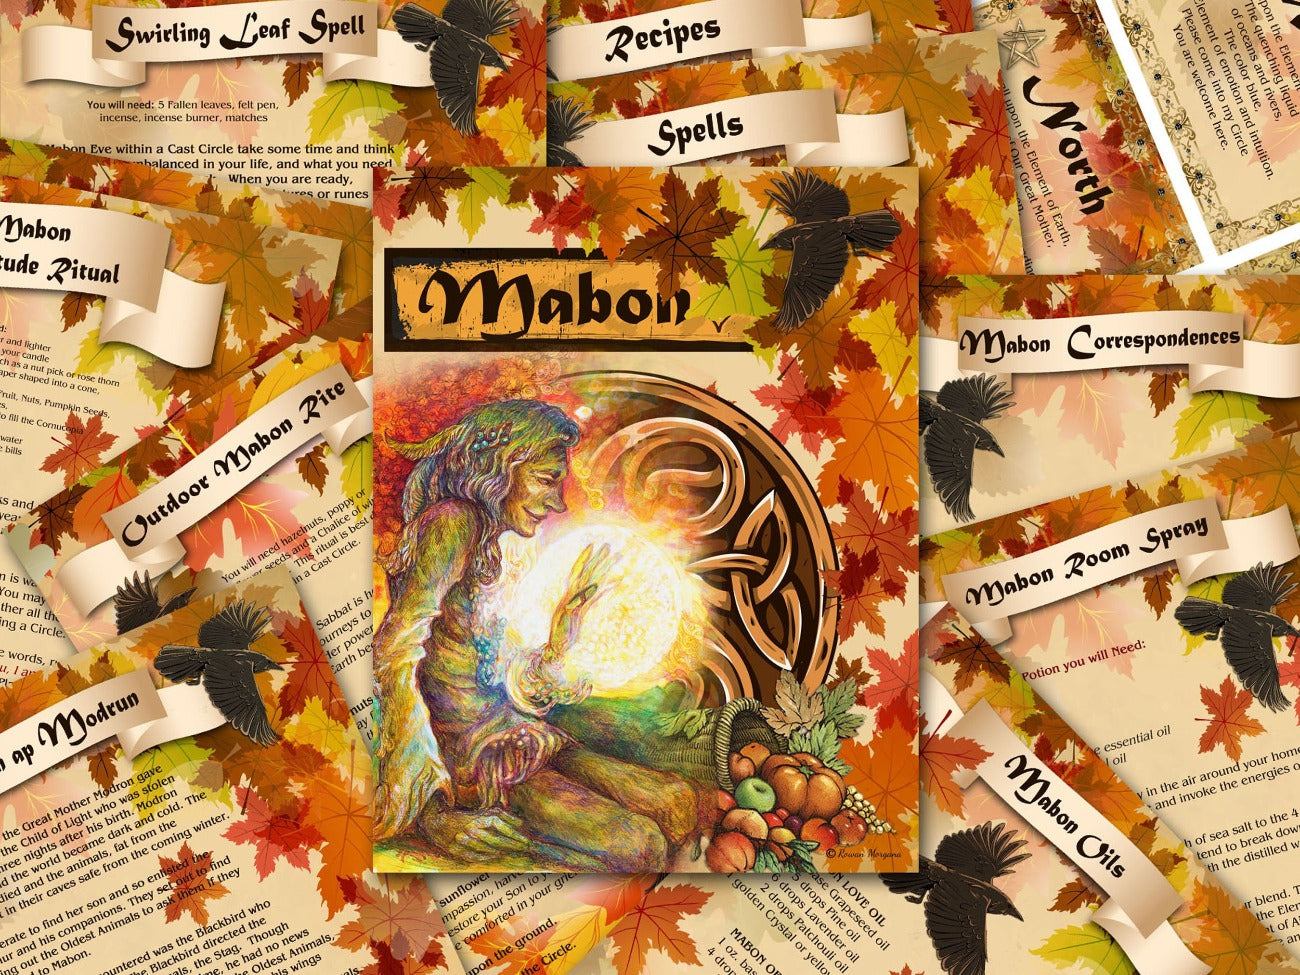 Mabon Bundle Pages, Wicca Witch Seaonal Celebrations, Baby Witch, Wheel of the Year, Sabbat Grimoire, Sabbat Traditions - Morgana Magick Spell